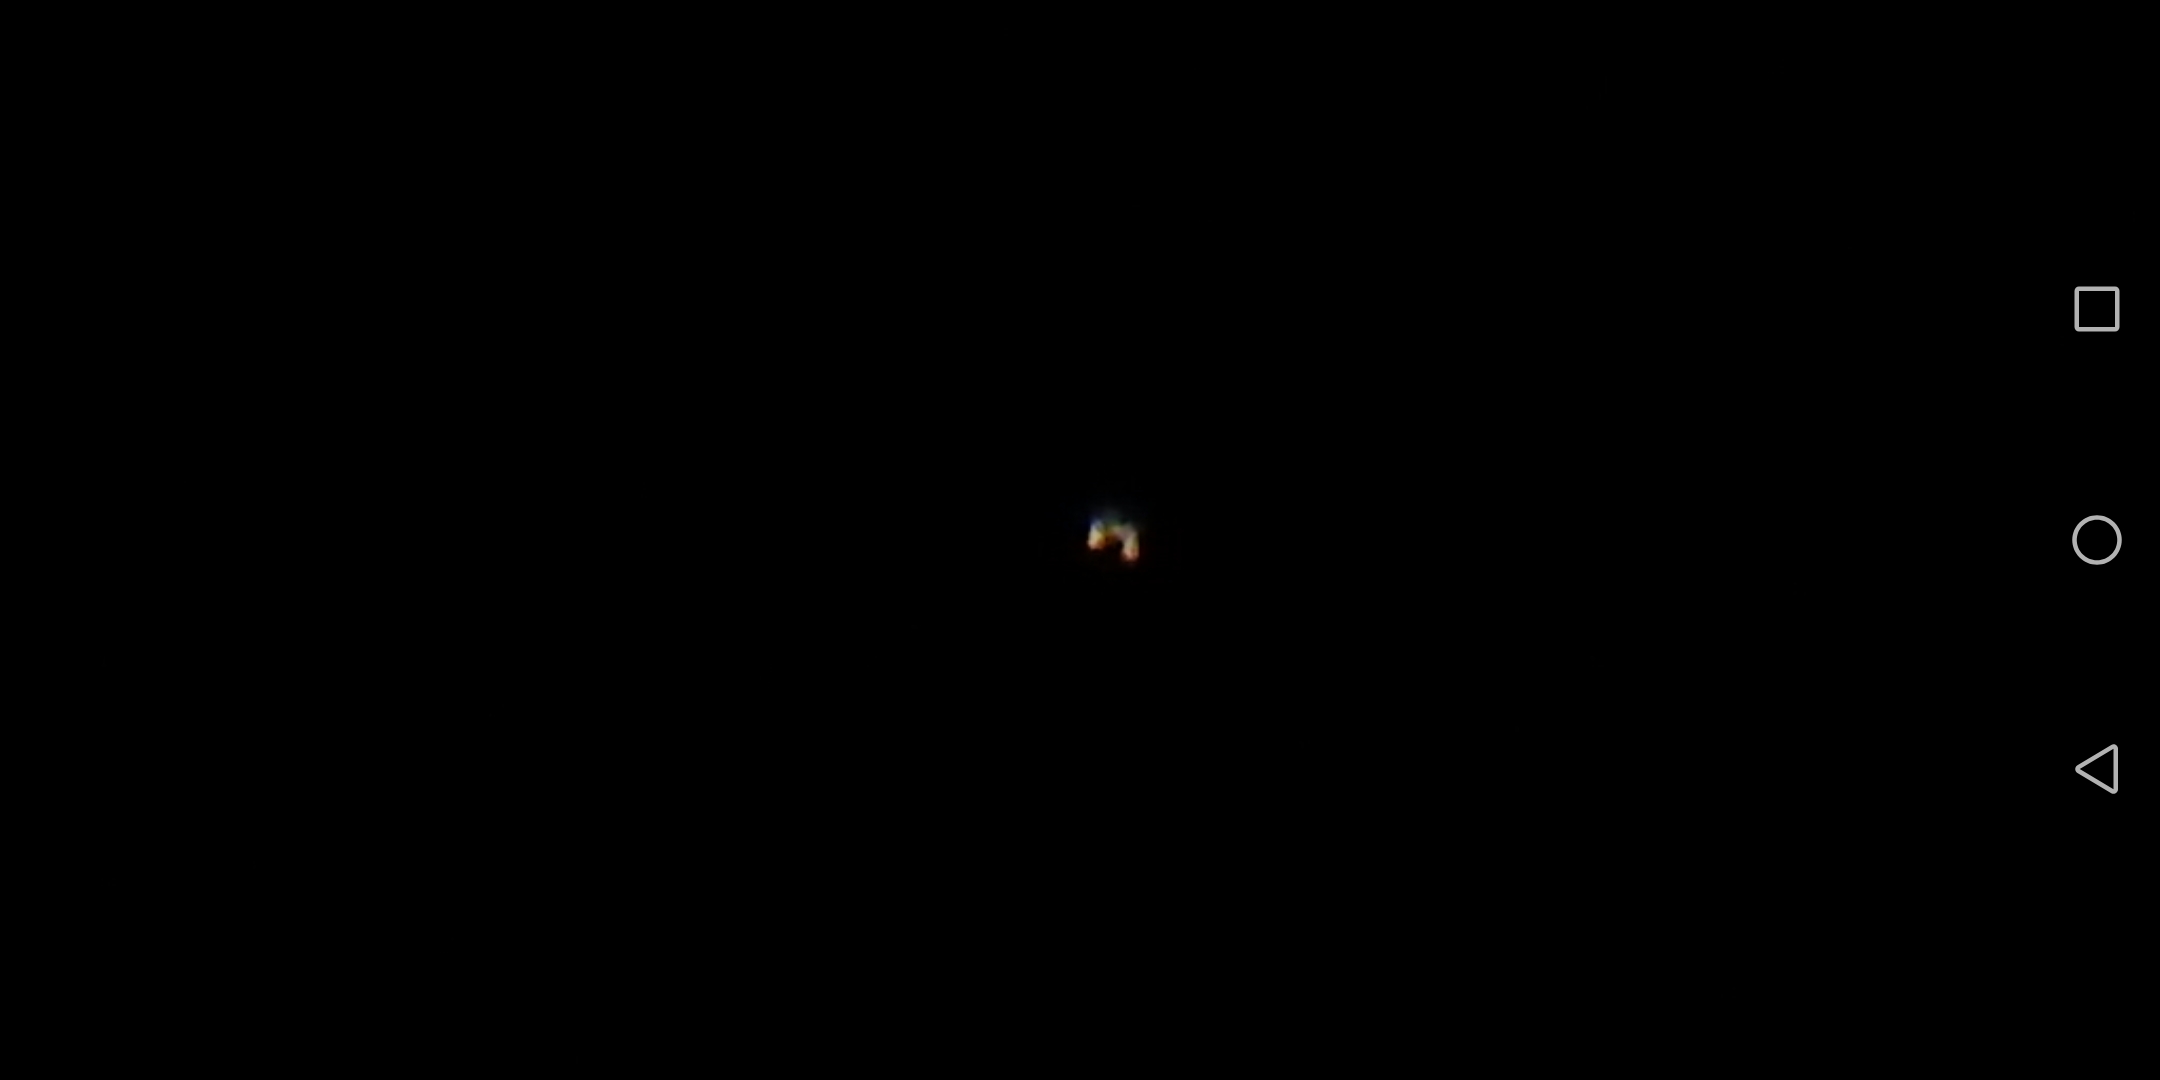 Iss International Space Station ...